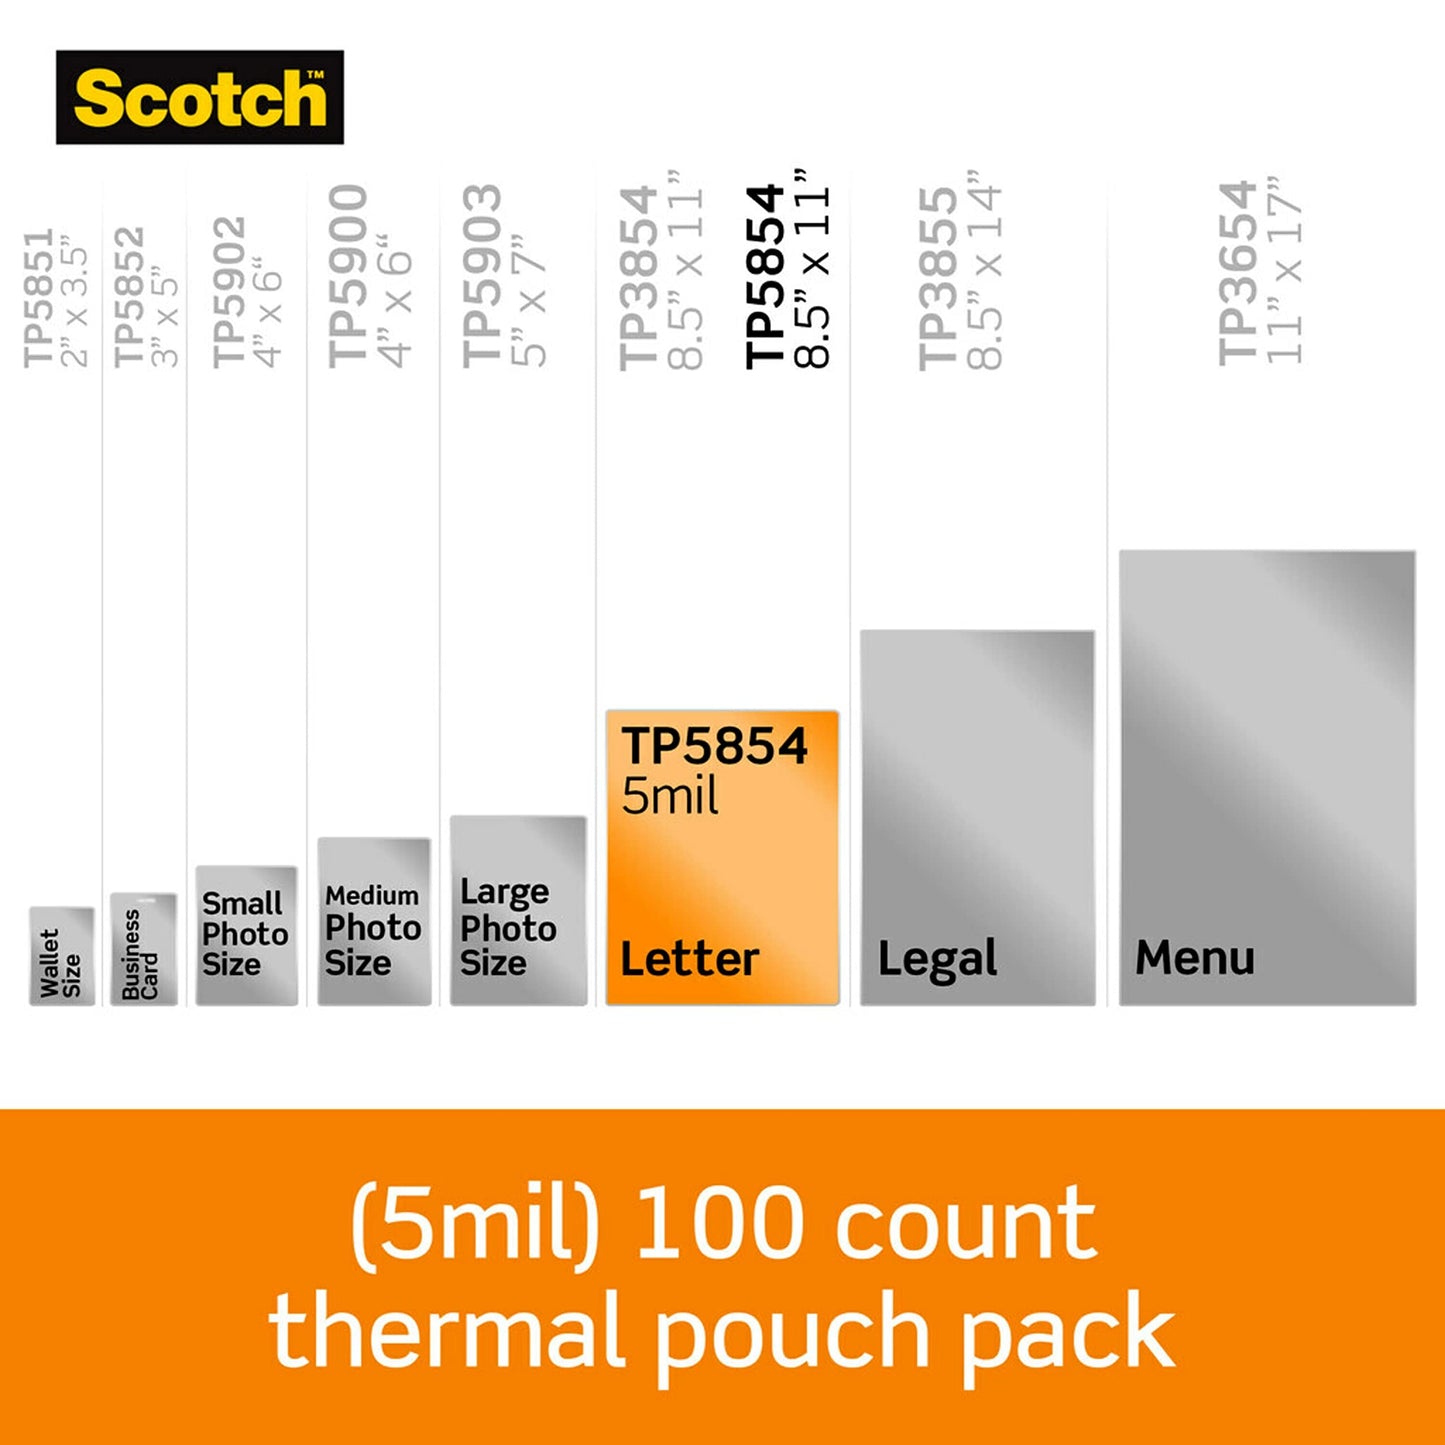 Scotch Thermal Laminating Pouches, 5 Mil Thick For Extra Protection, 100-Pack, 8.9 X 11.4 Inches, Letter Size Sheets, Clear (Tp5854-100)